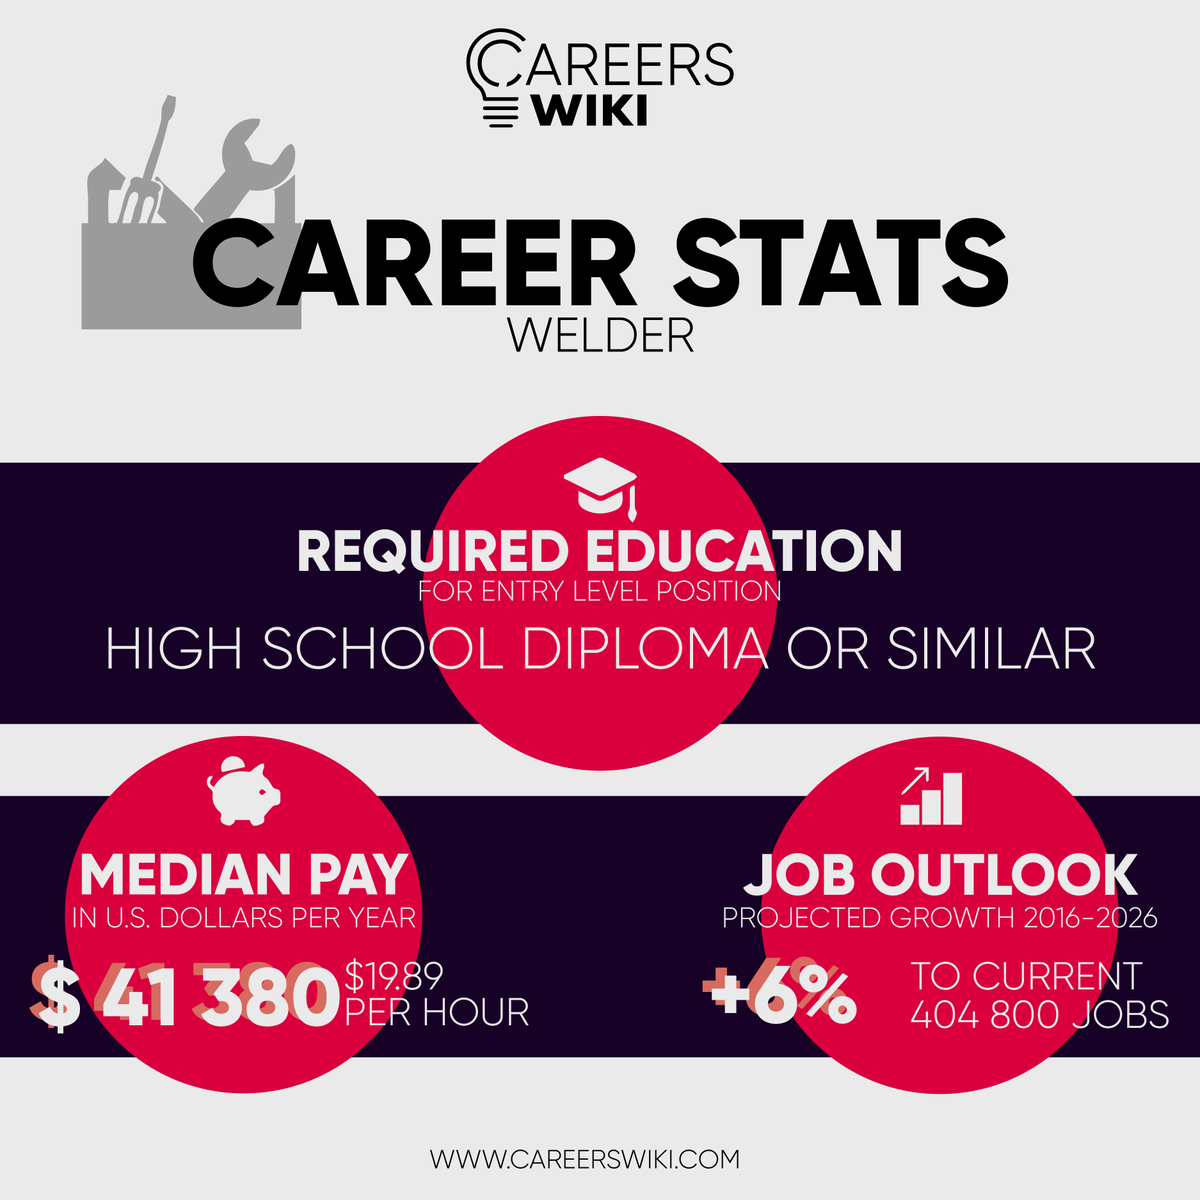 #CAREERSTATS | Do you see yourself  joining metals together and creating timeless constructions? Welder might be a career for you. Here is the fact about this career path!

Learn how can you become a welder by reading our guide:
careerswiki.com/how-to-become-…